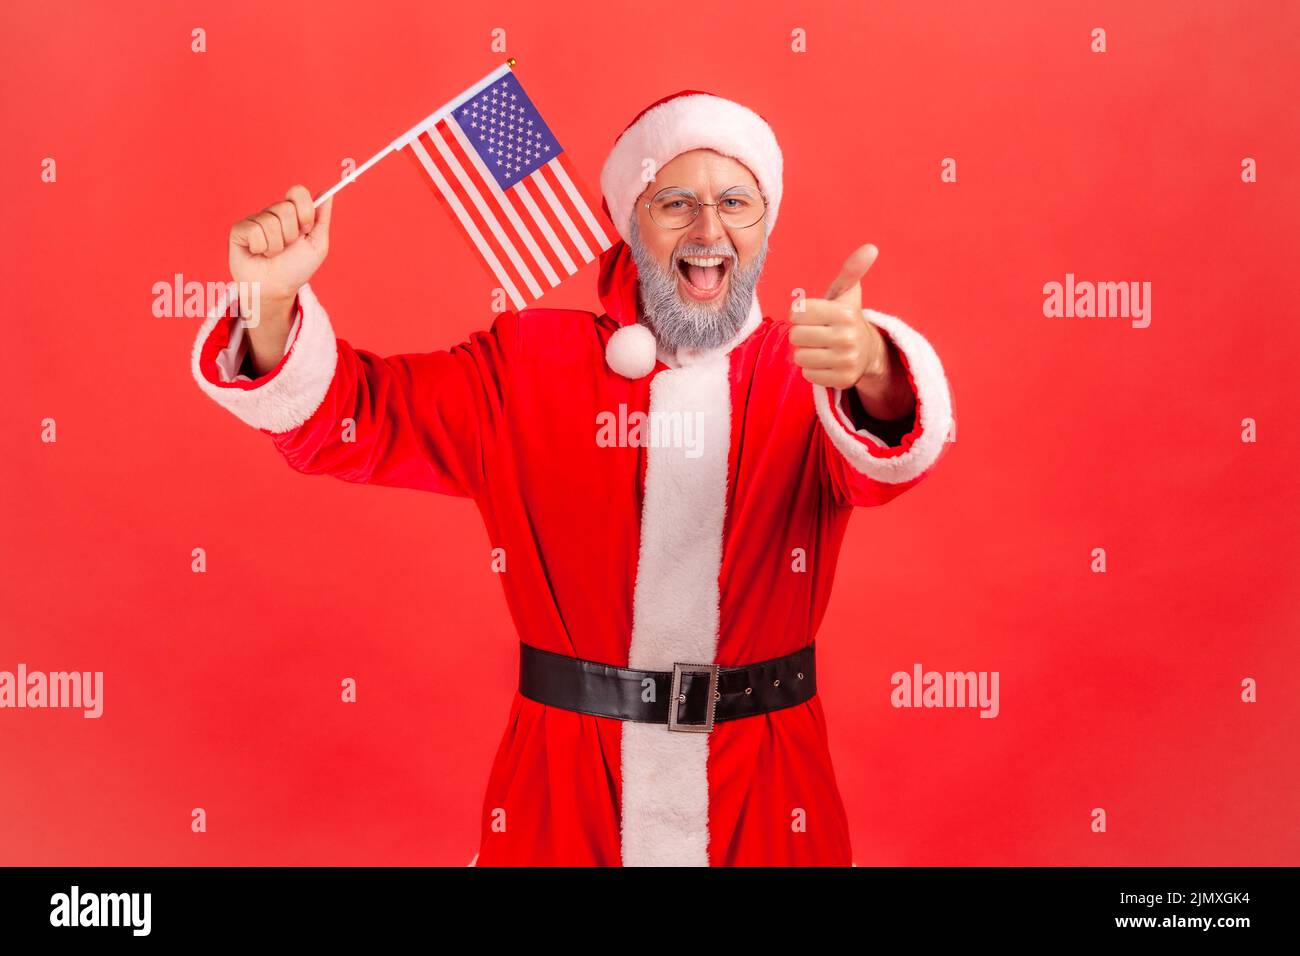 Smiling positive elderly man with gray beard wearing santa claus costume holding USA flag, showing thumb up to camera, having patriotic mood. Indoor studio shot isolated on red background. Stock Photo